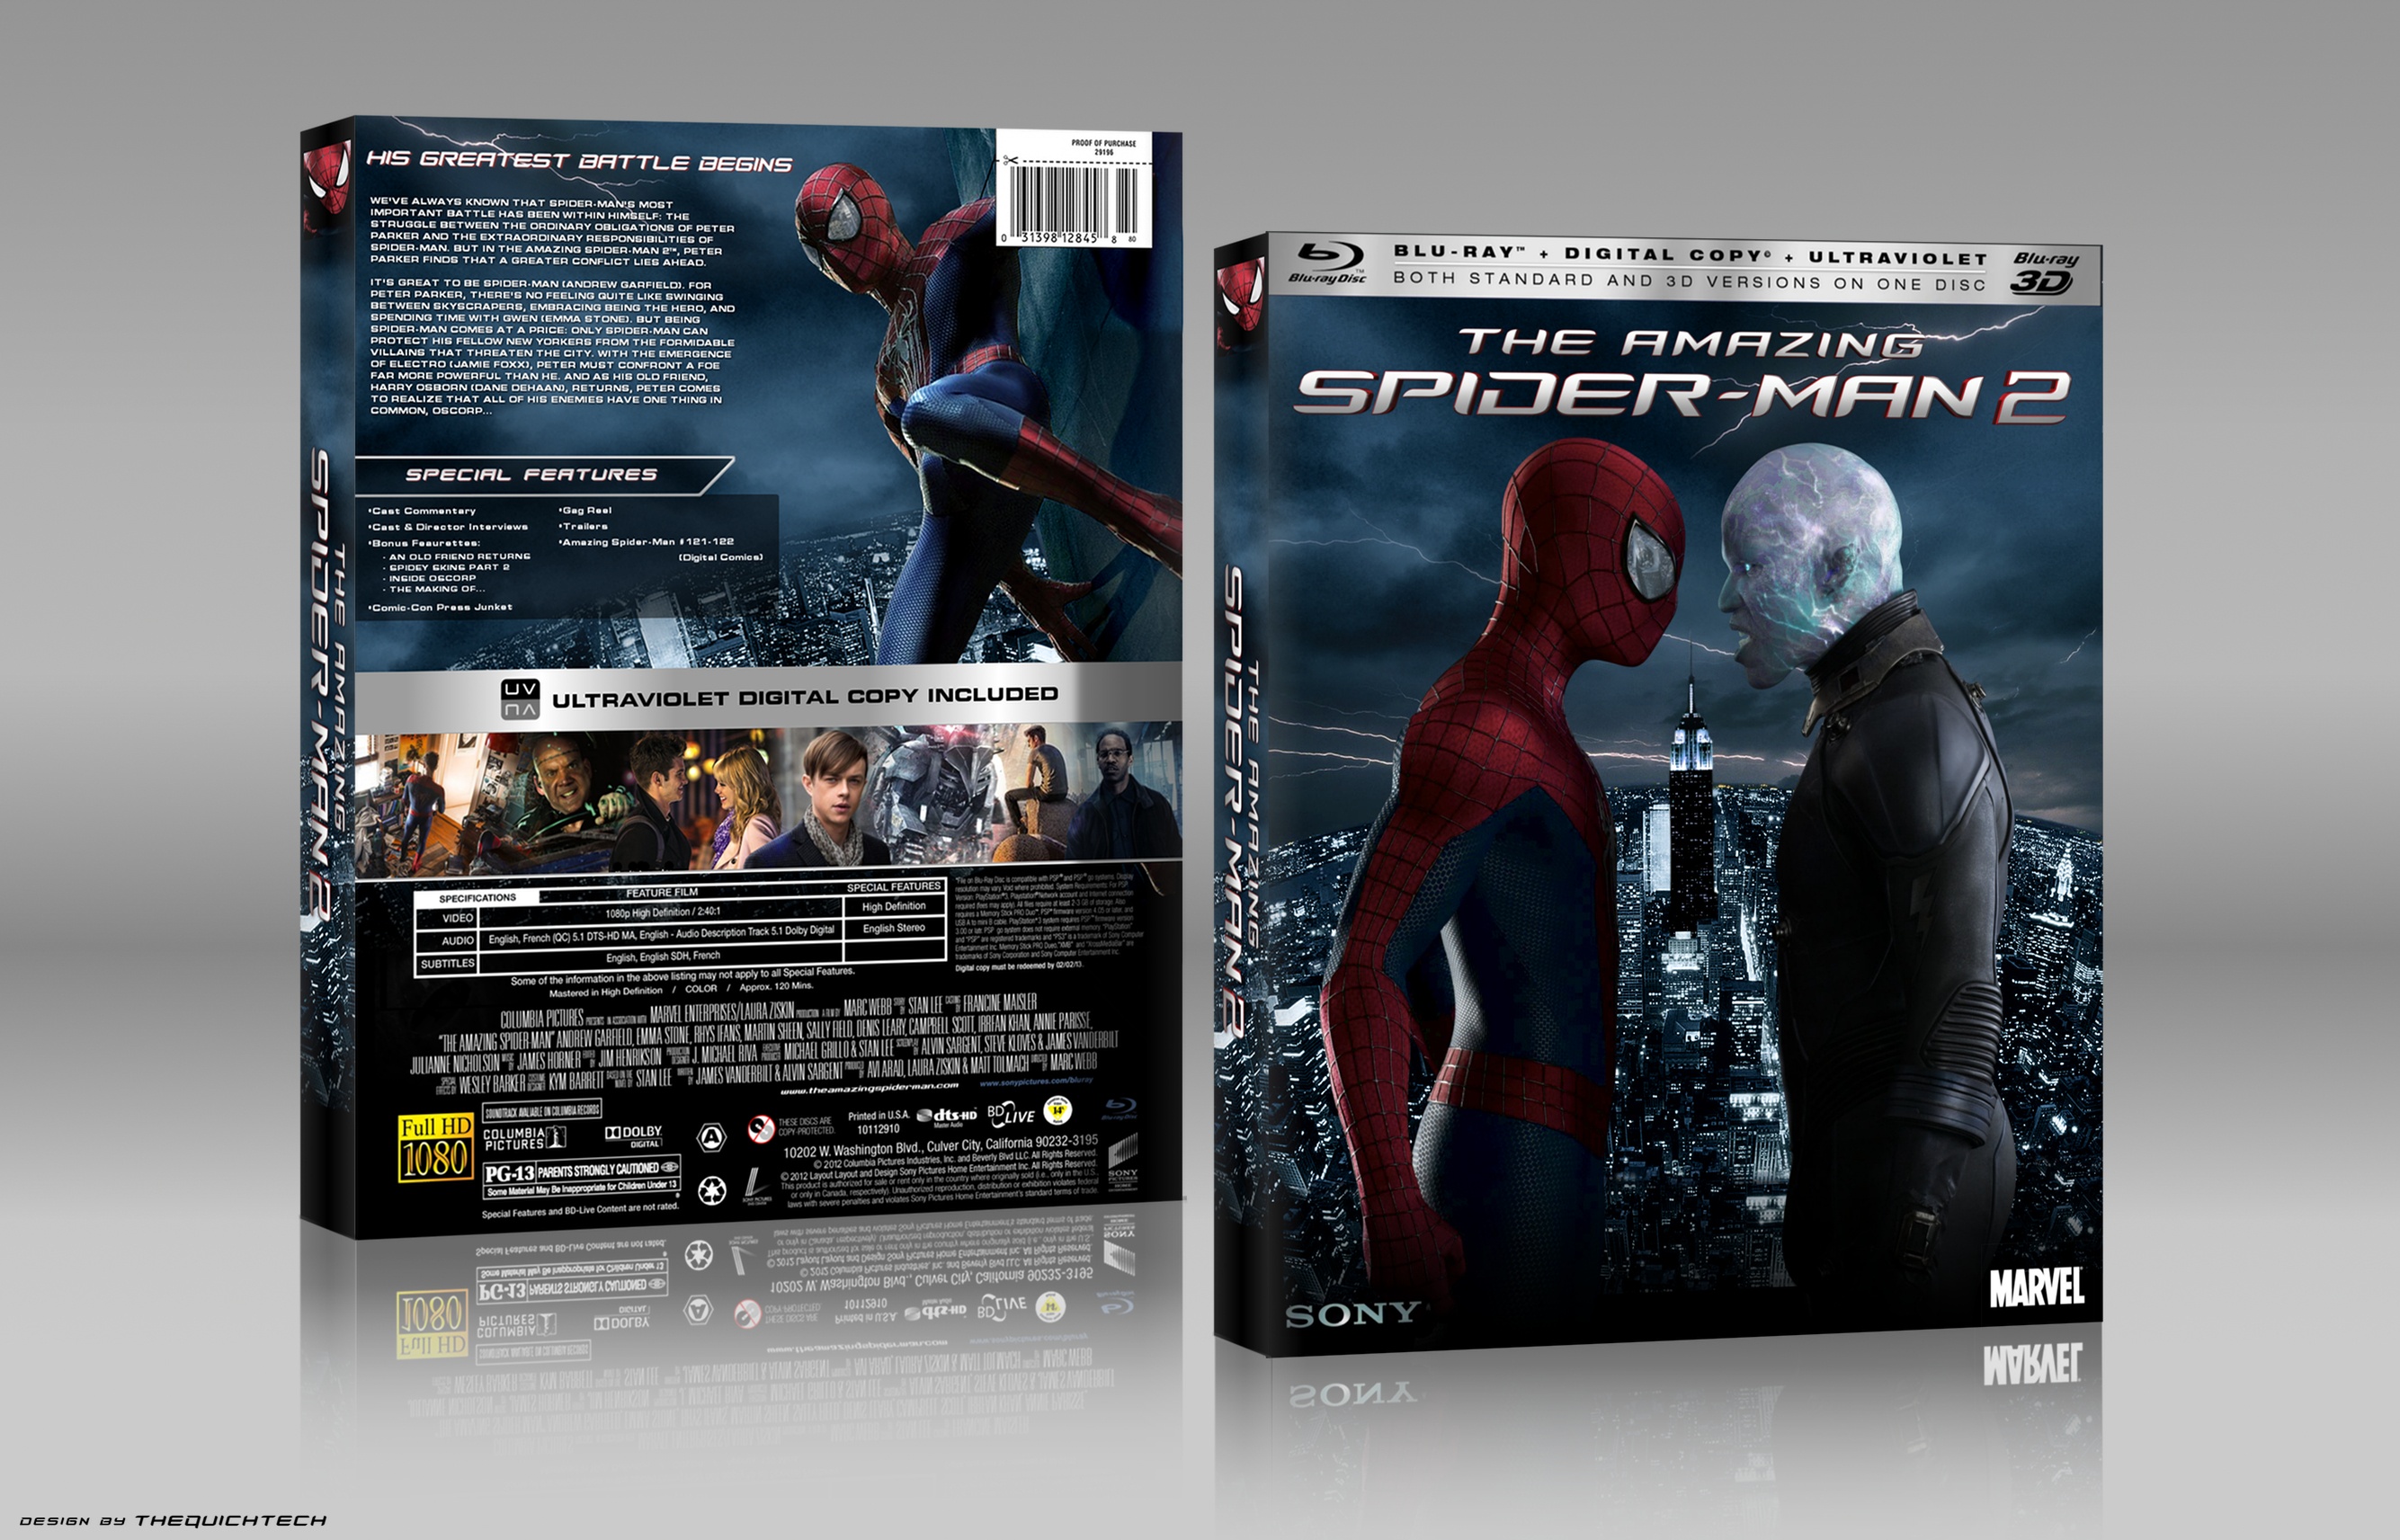 The Amazing Spider-Man 2 box cover